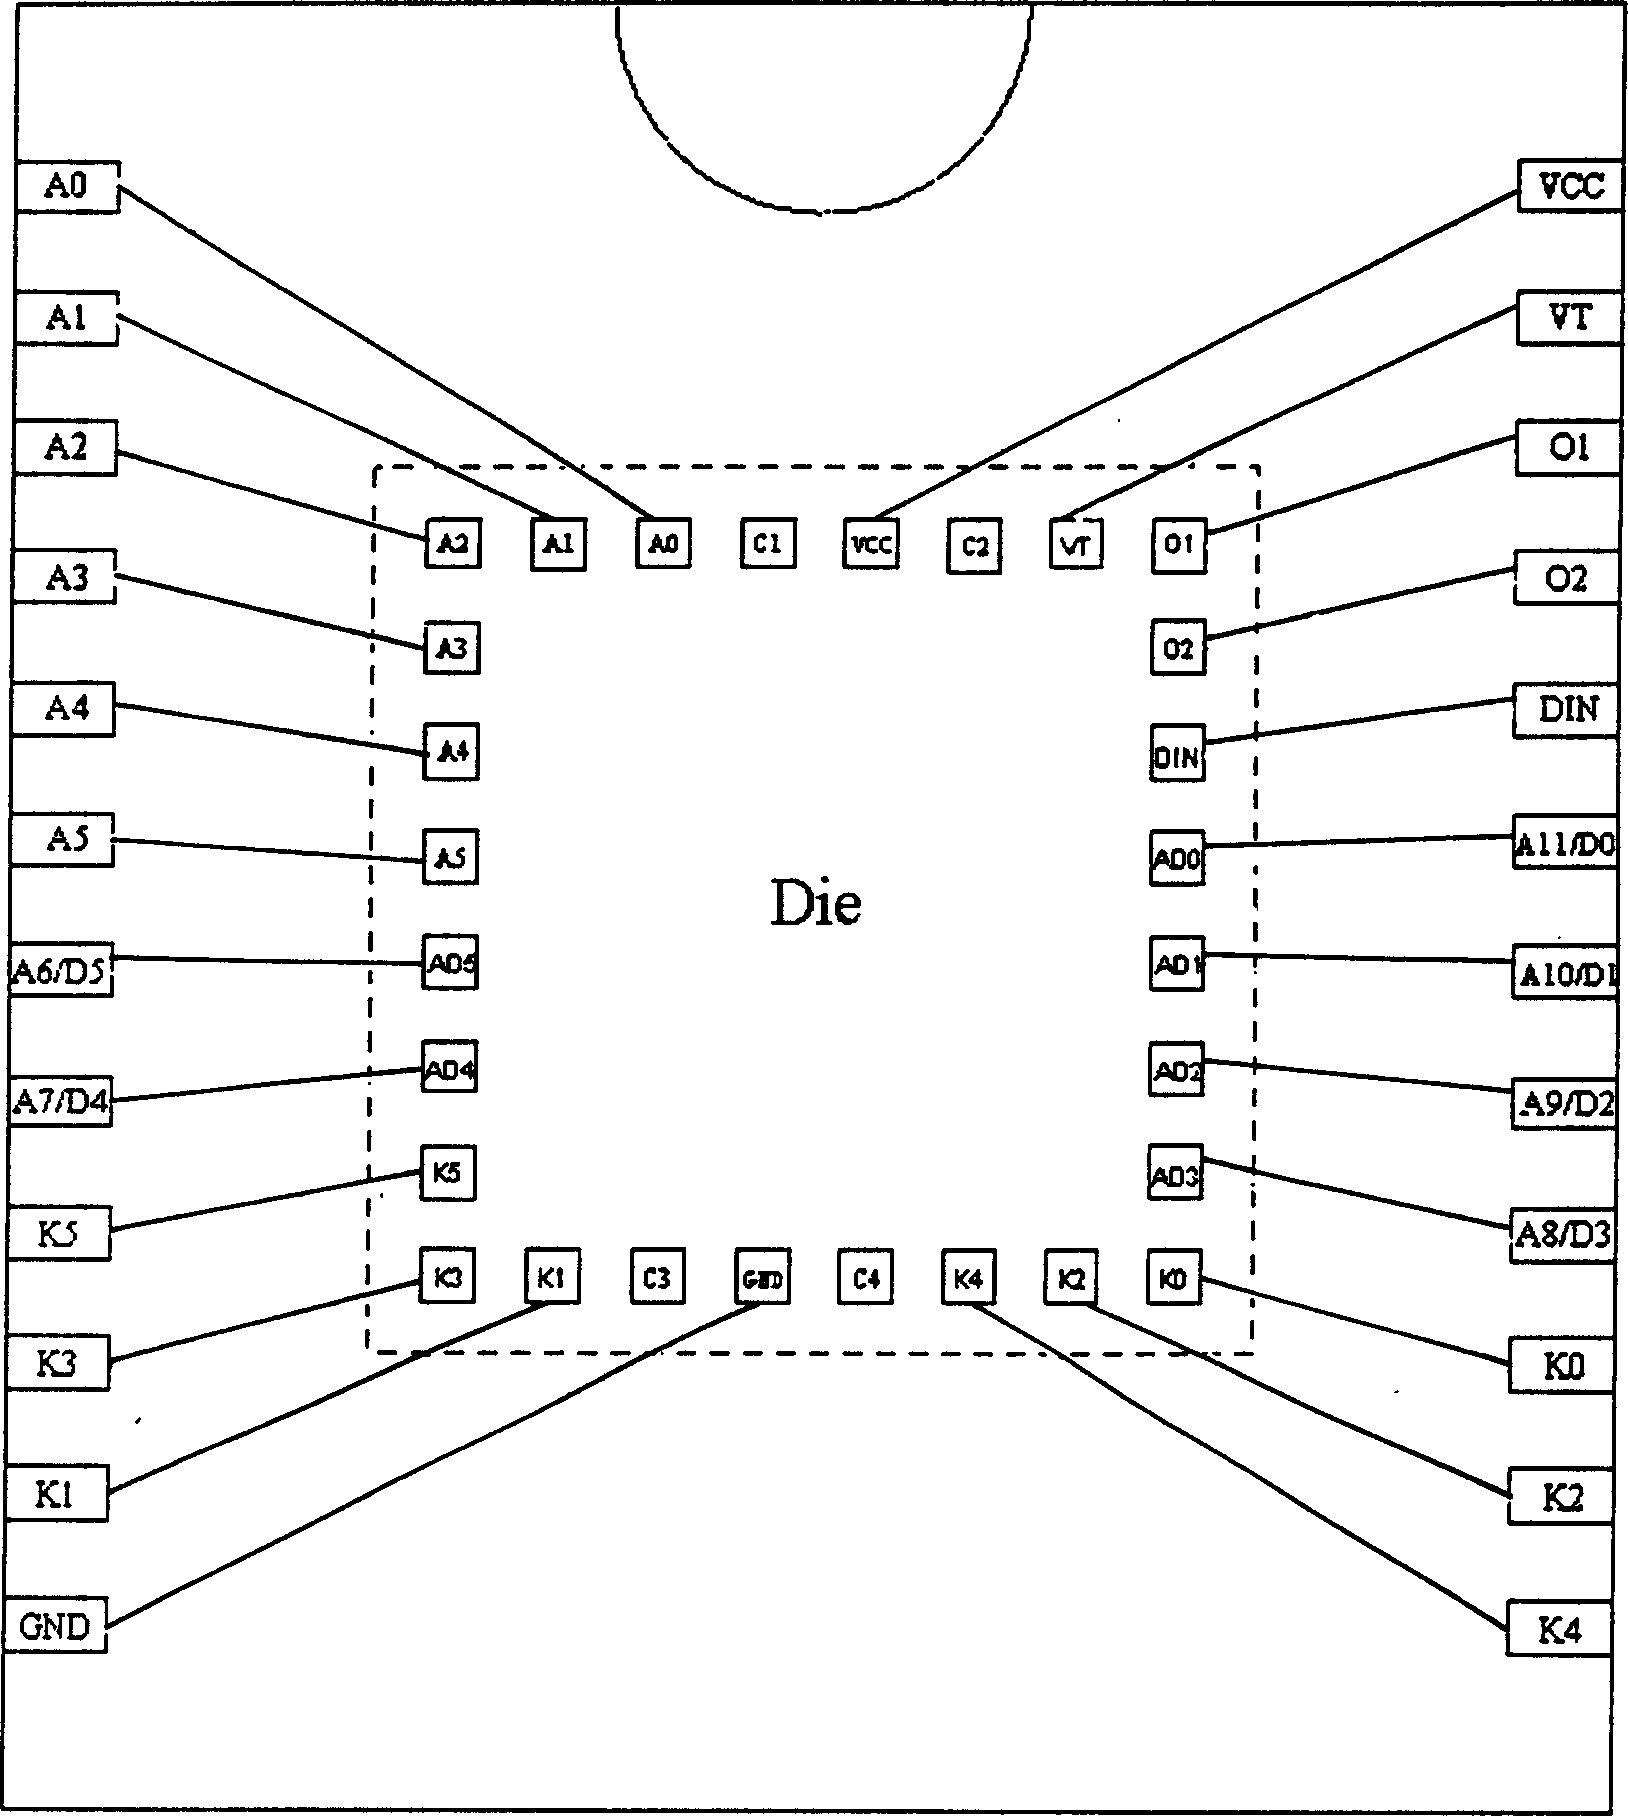 Decoding chip for remote control switch of electrical appliance